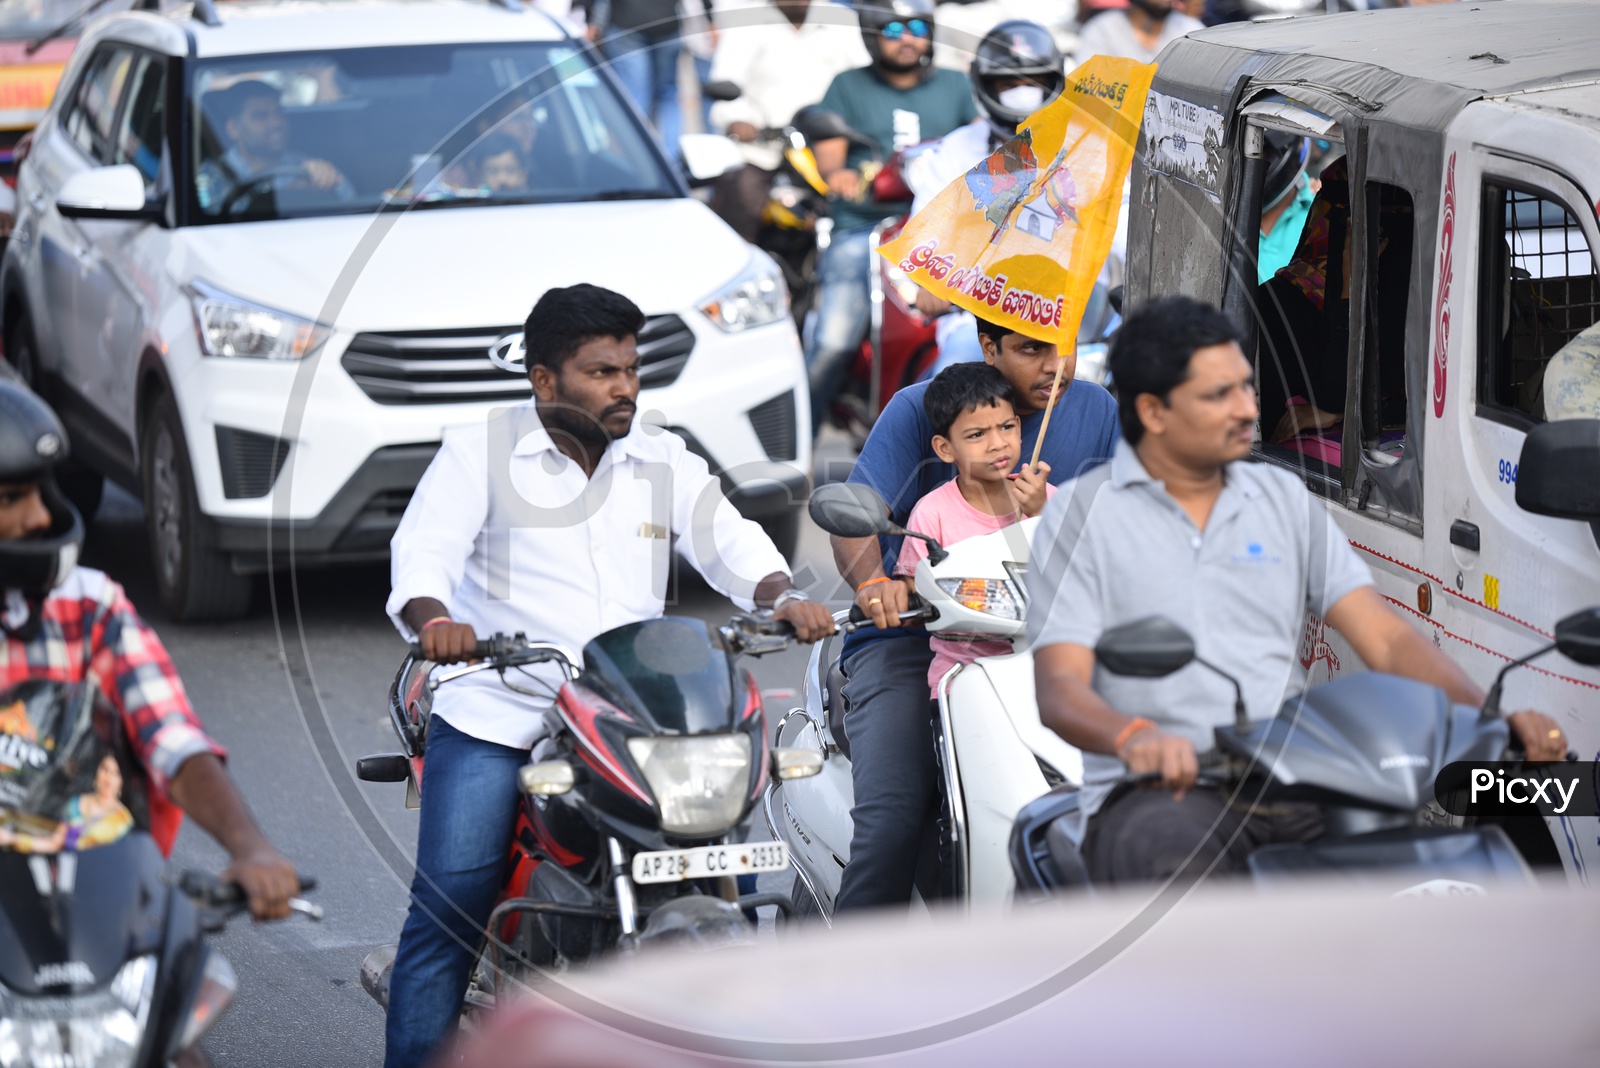 A Child Carrying TDP Flag in a Traffic